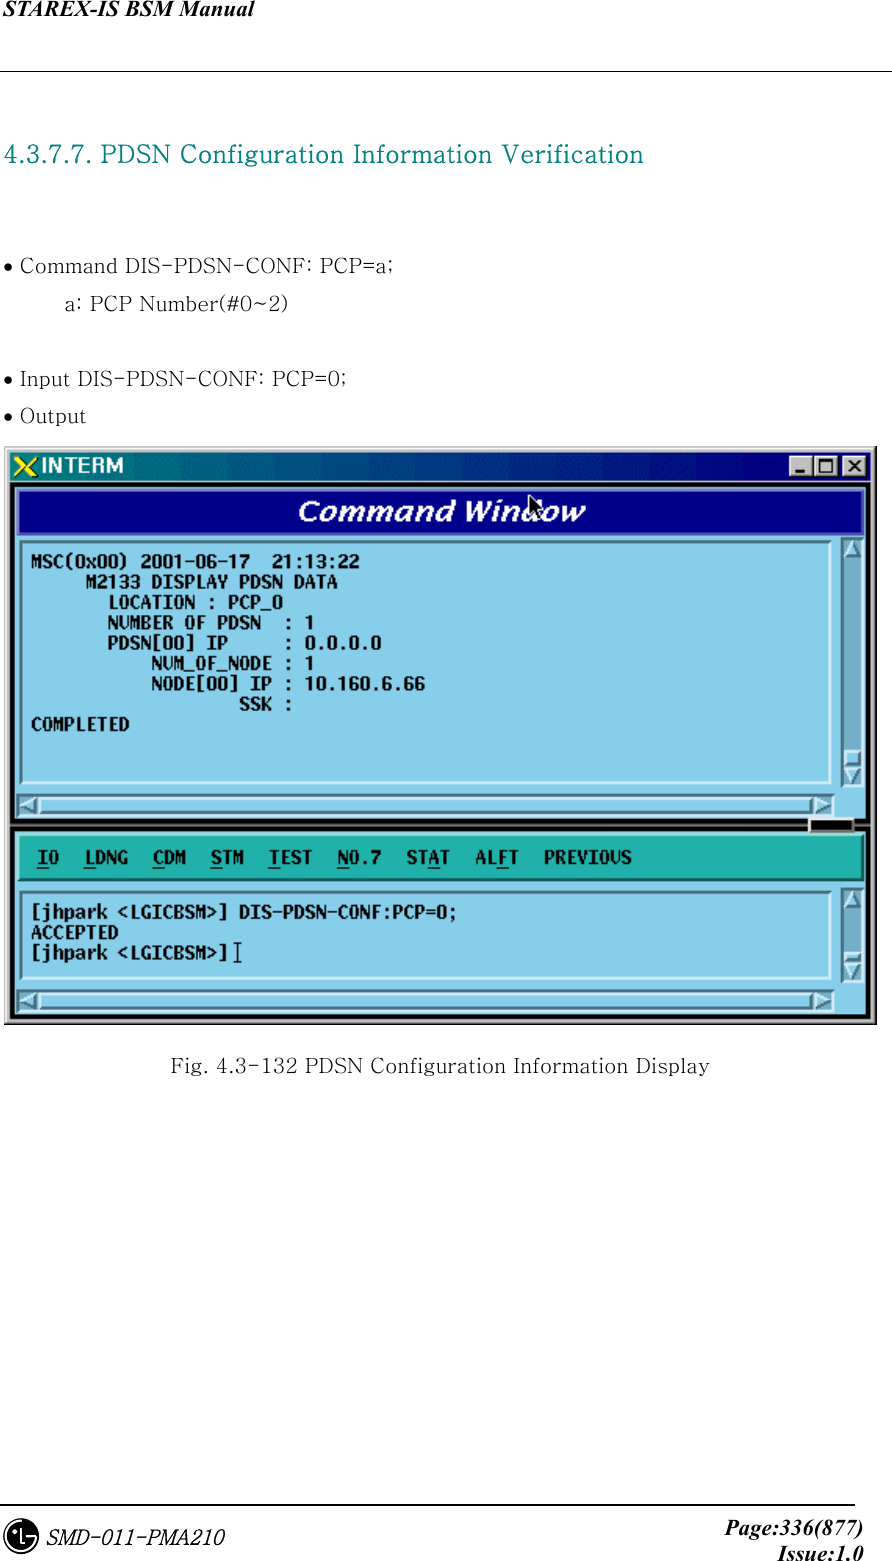 STAREX-IS BSM Manual     Page:336(877)Issue:1.0SMD-011-PMA210  4.3.7.7. PDSN Configuration Information Verification   • Command DIS-PDSN-CONF: PCP=a;   a: PCP Number(#0~2)  • Input DIS-PDSN-CONF: PCP=0; • Output  Fig. 4.3-132 PDSN Configuration Information Display 